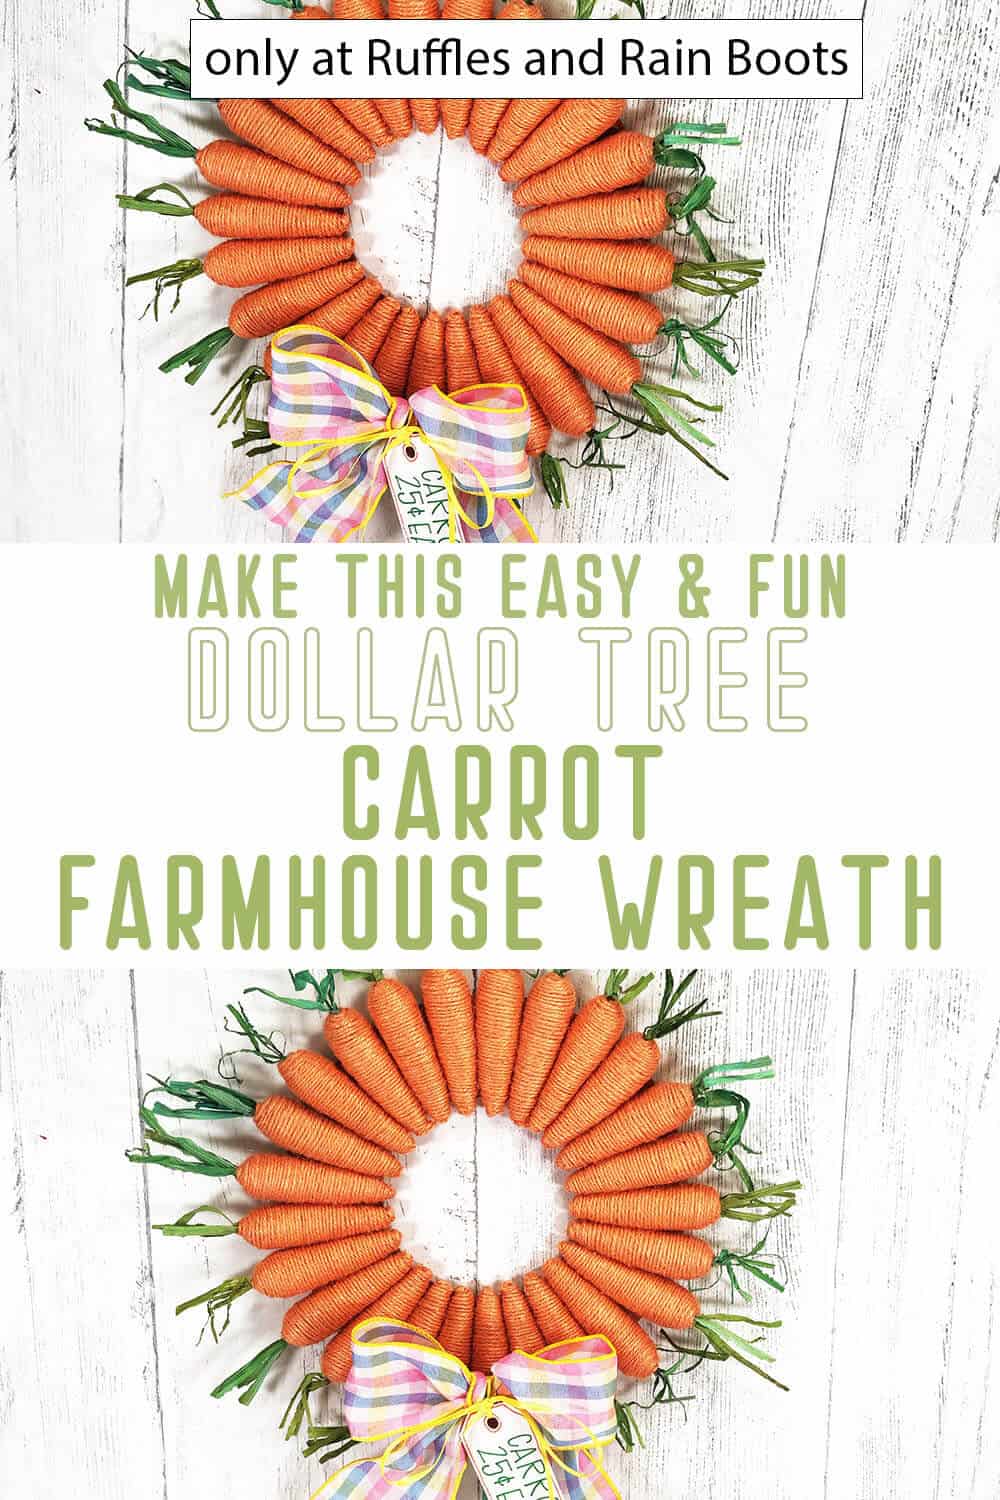 photo collage of farmhouse carrot wreath dollar tree craft with text which reads make this easy & fun dollar tree carrot farmhouse wreath